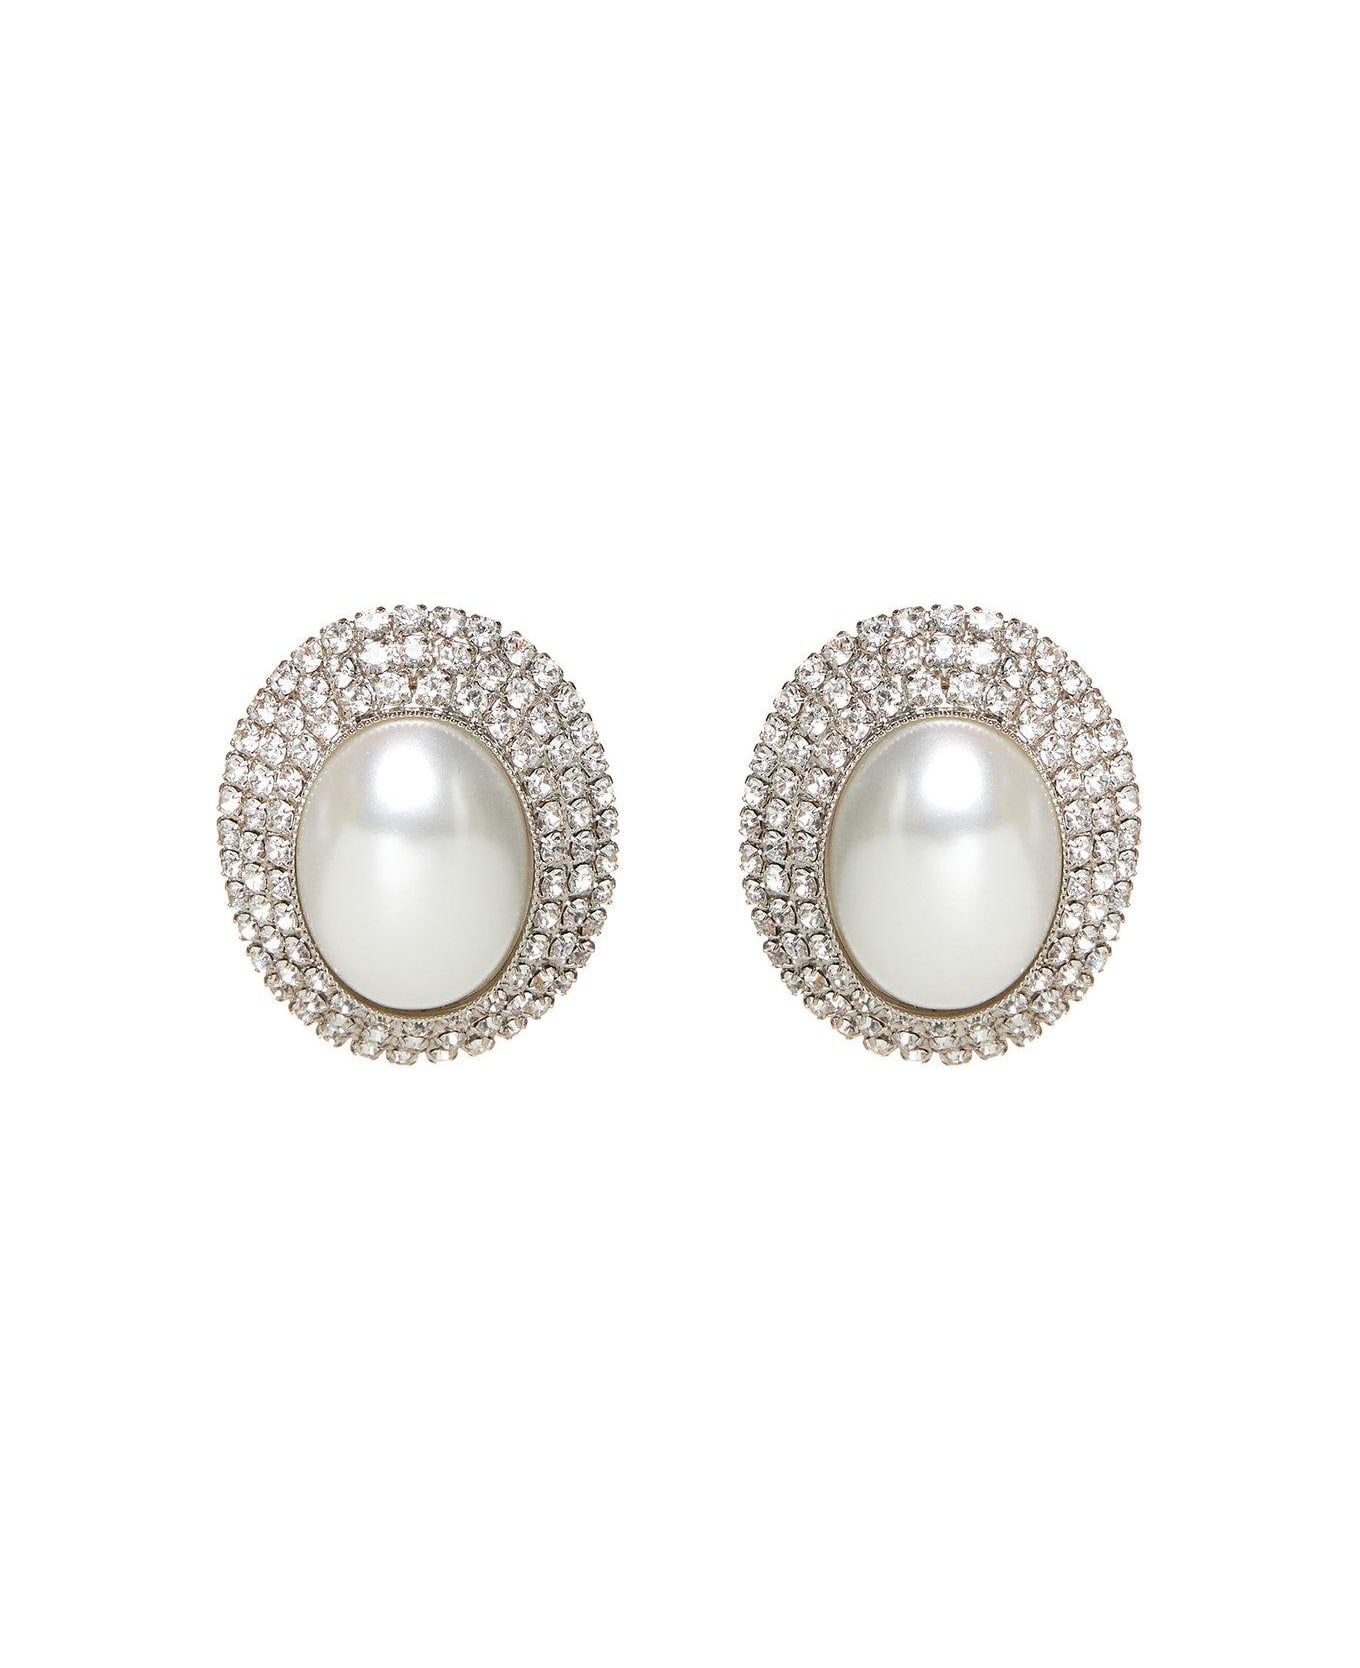 Alessandra Rich Embellished Clip-on Earrings - Cry Silver イヤリング